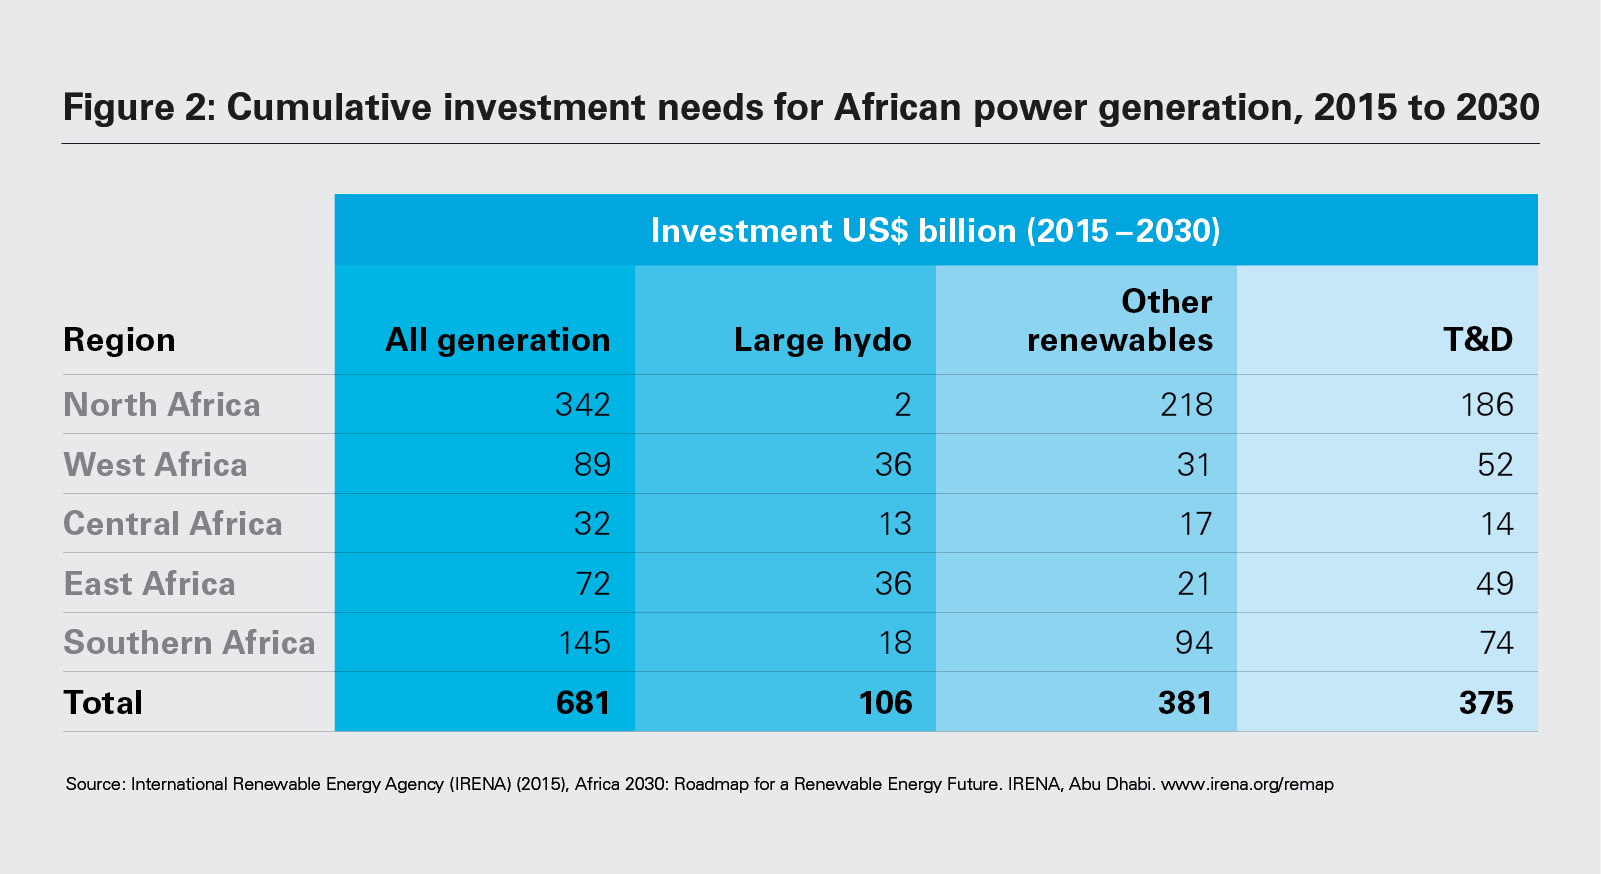 Figure 2: Cumulative investment needs for African power generation, 2015 to 2030